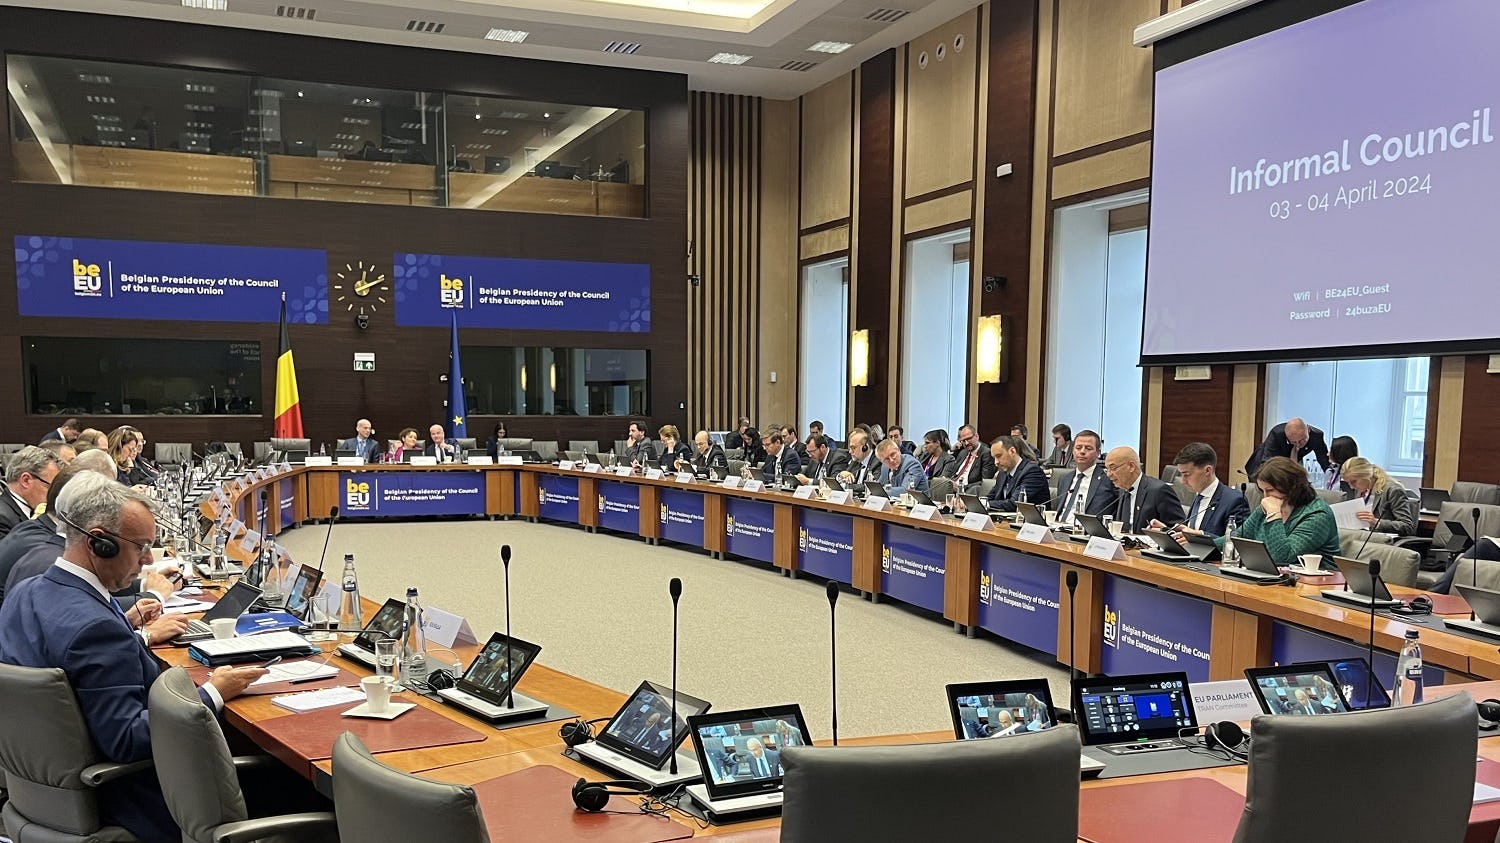 With 27 European Transport Ministers joining the informal council meeting, the high-level gathering can be seen as a big step forward for growing cycling and developing a world-class European cycling industry. – Photo CIE